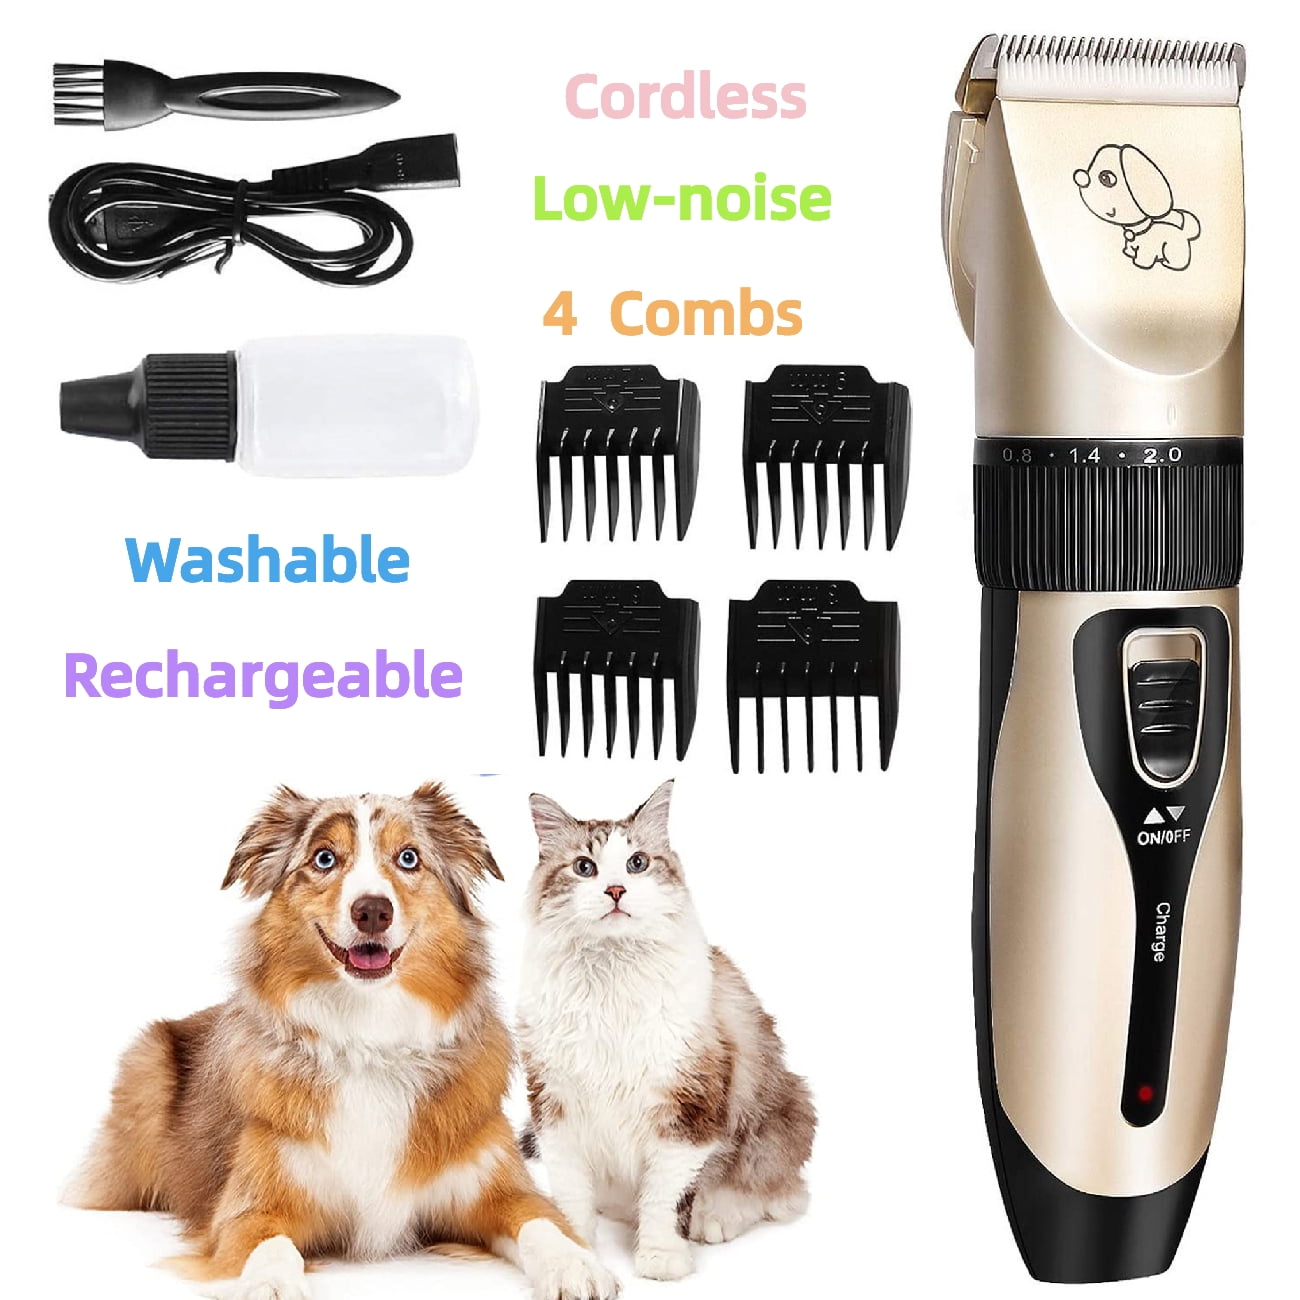 Pet Grooming Clippers,Focuspet 2 level speed adjustable Rechargeable Cordless Dog Grooming Clippers Kit Low Noise Electric Hair Trimming Clippers Set Small Medium Large Dogs Cats Animals 